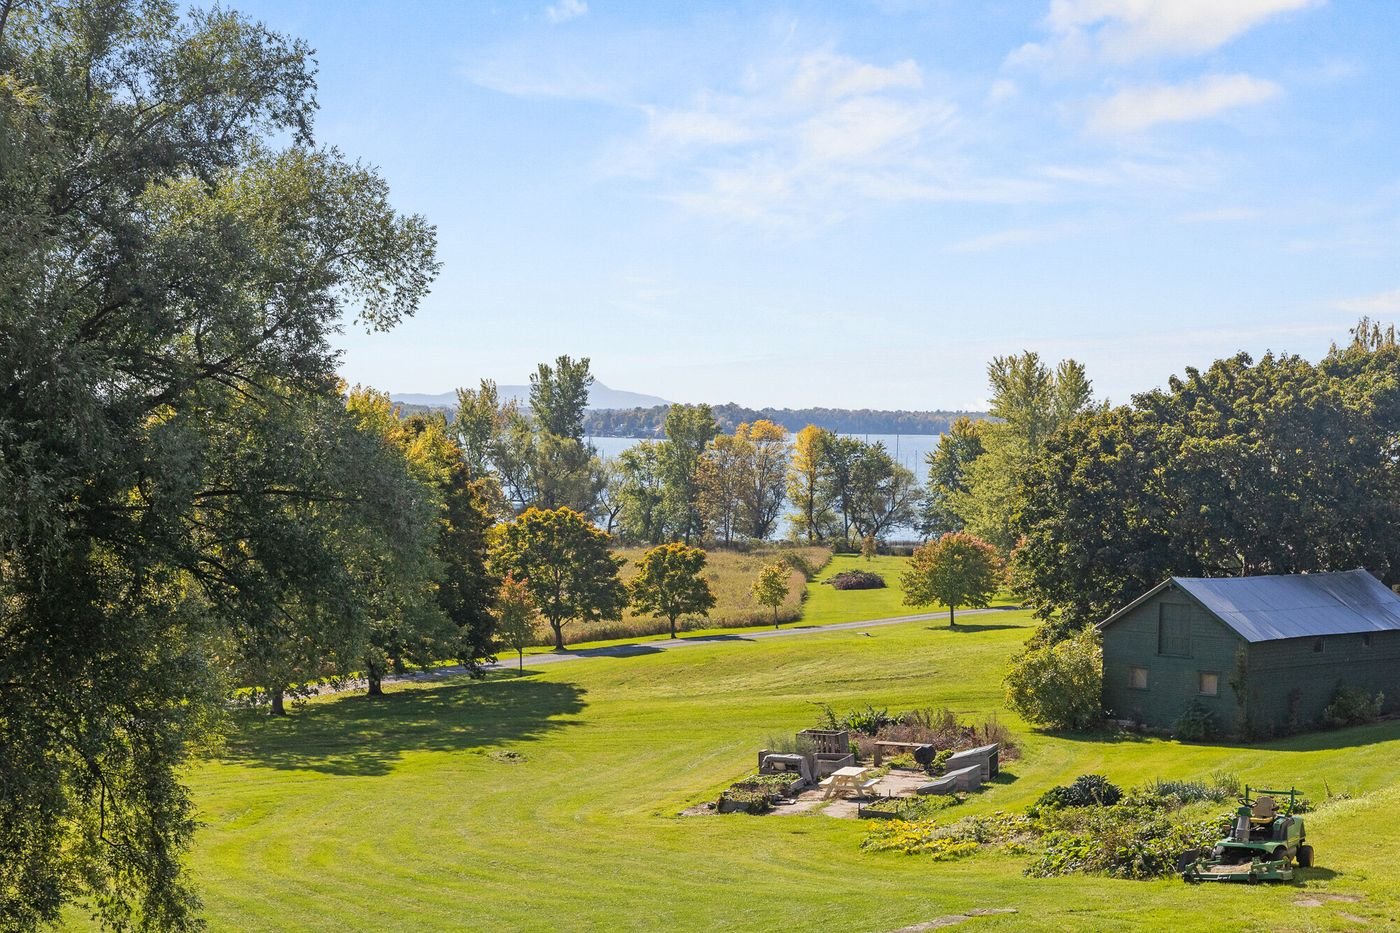 Francis York This New England Estate Comes with a Restored 18th Century Farmhouse and Entertainment Barns 6.jpeg